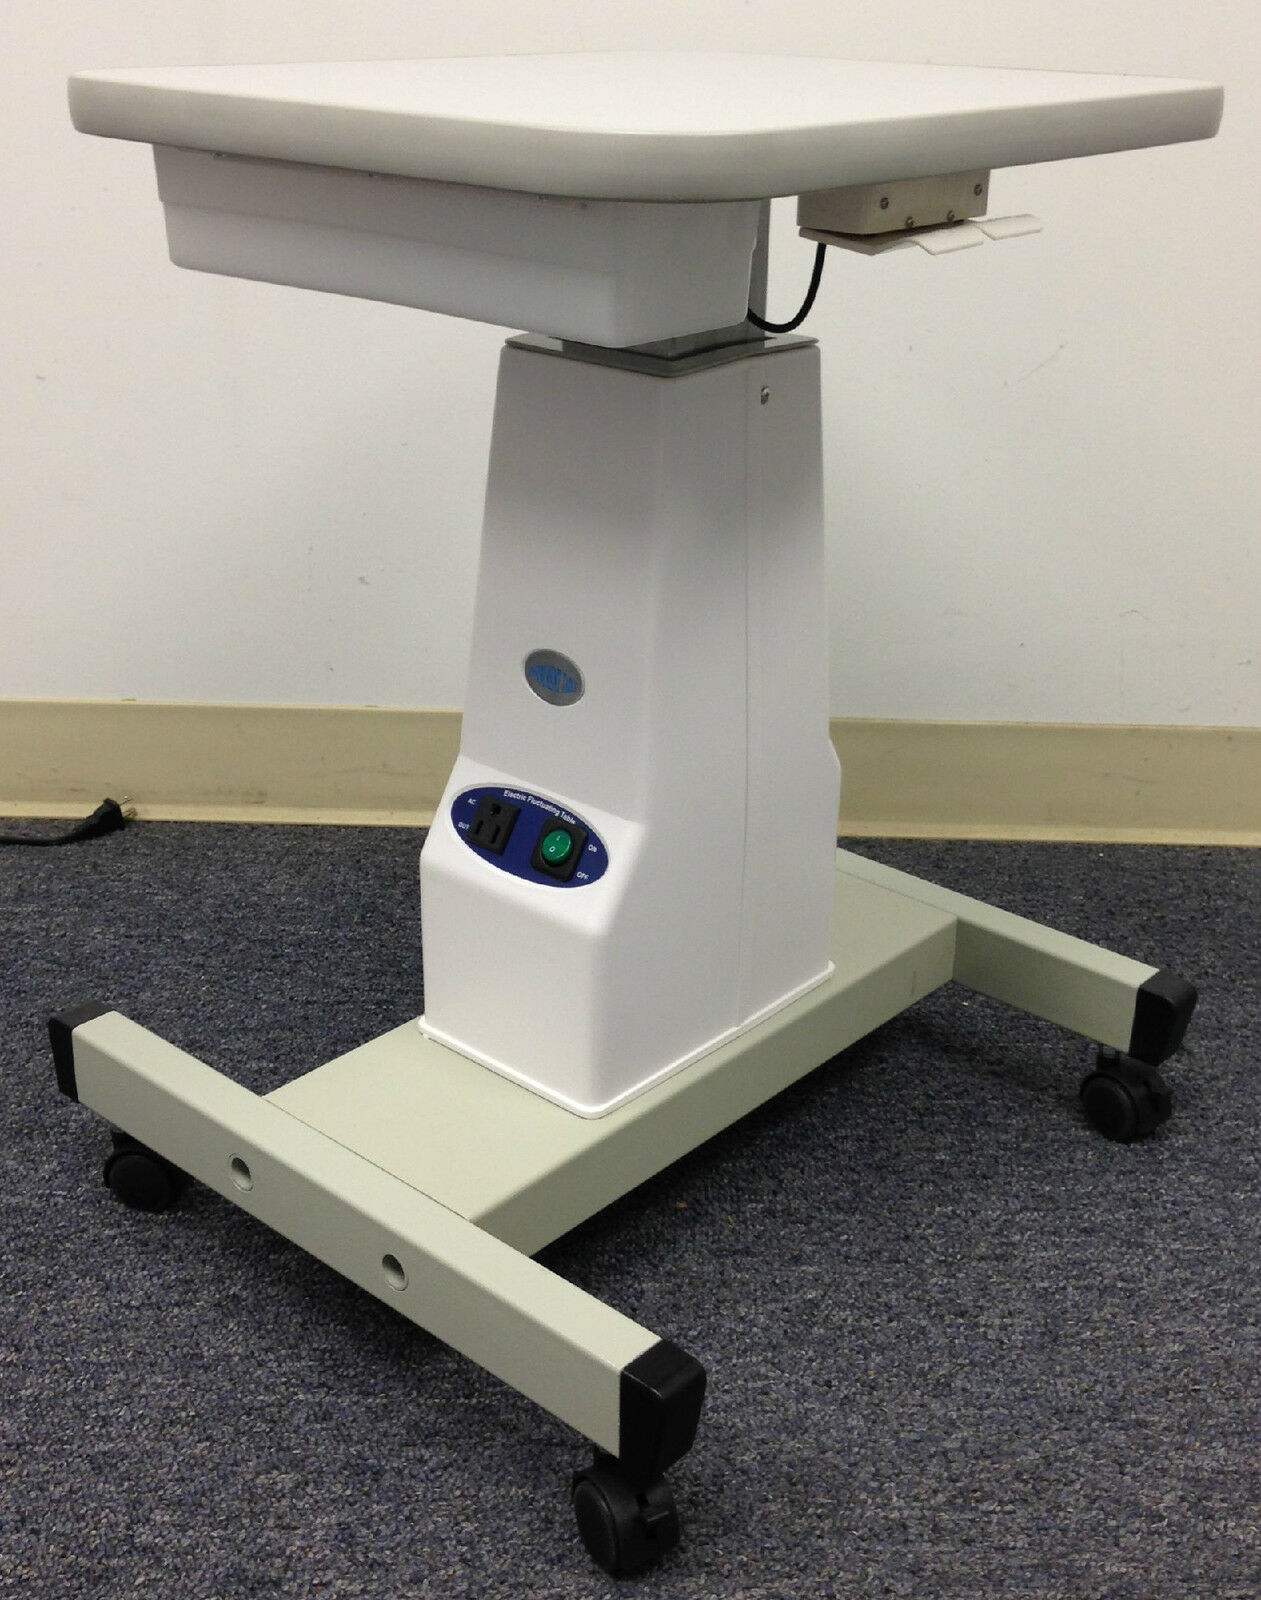 Bst-d16 Motorized Table For Optical Store Optician Eyecare Instrument Table